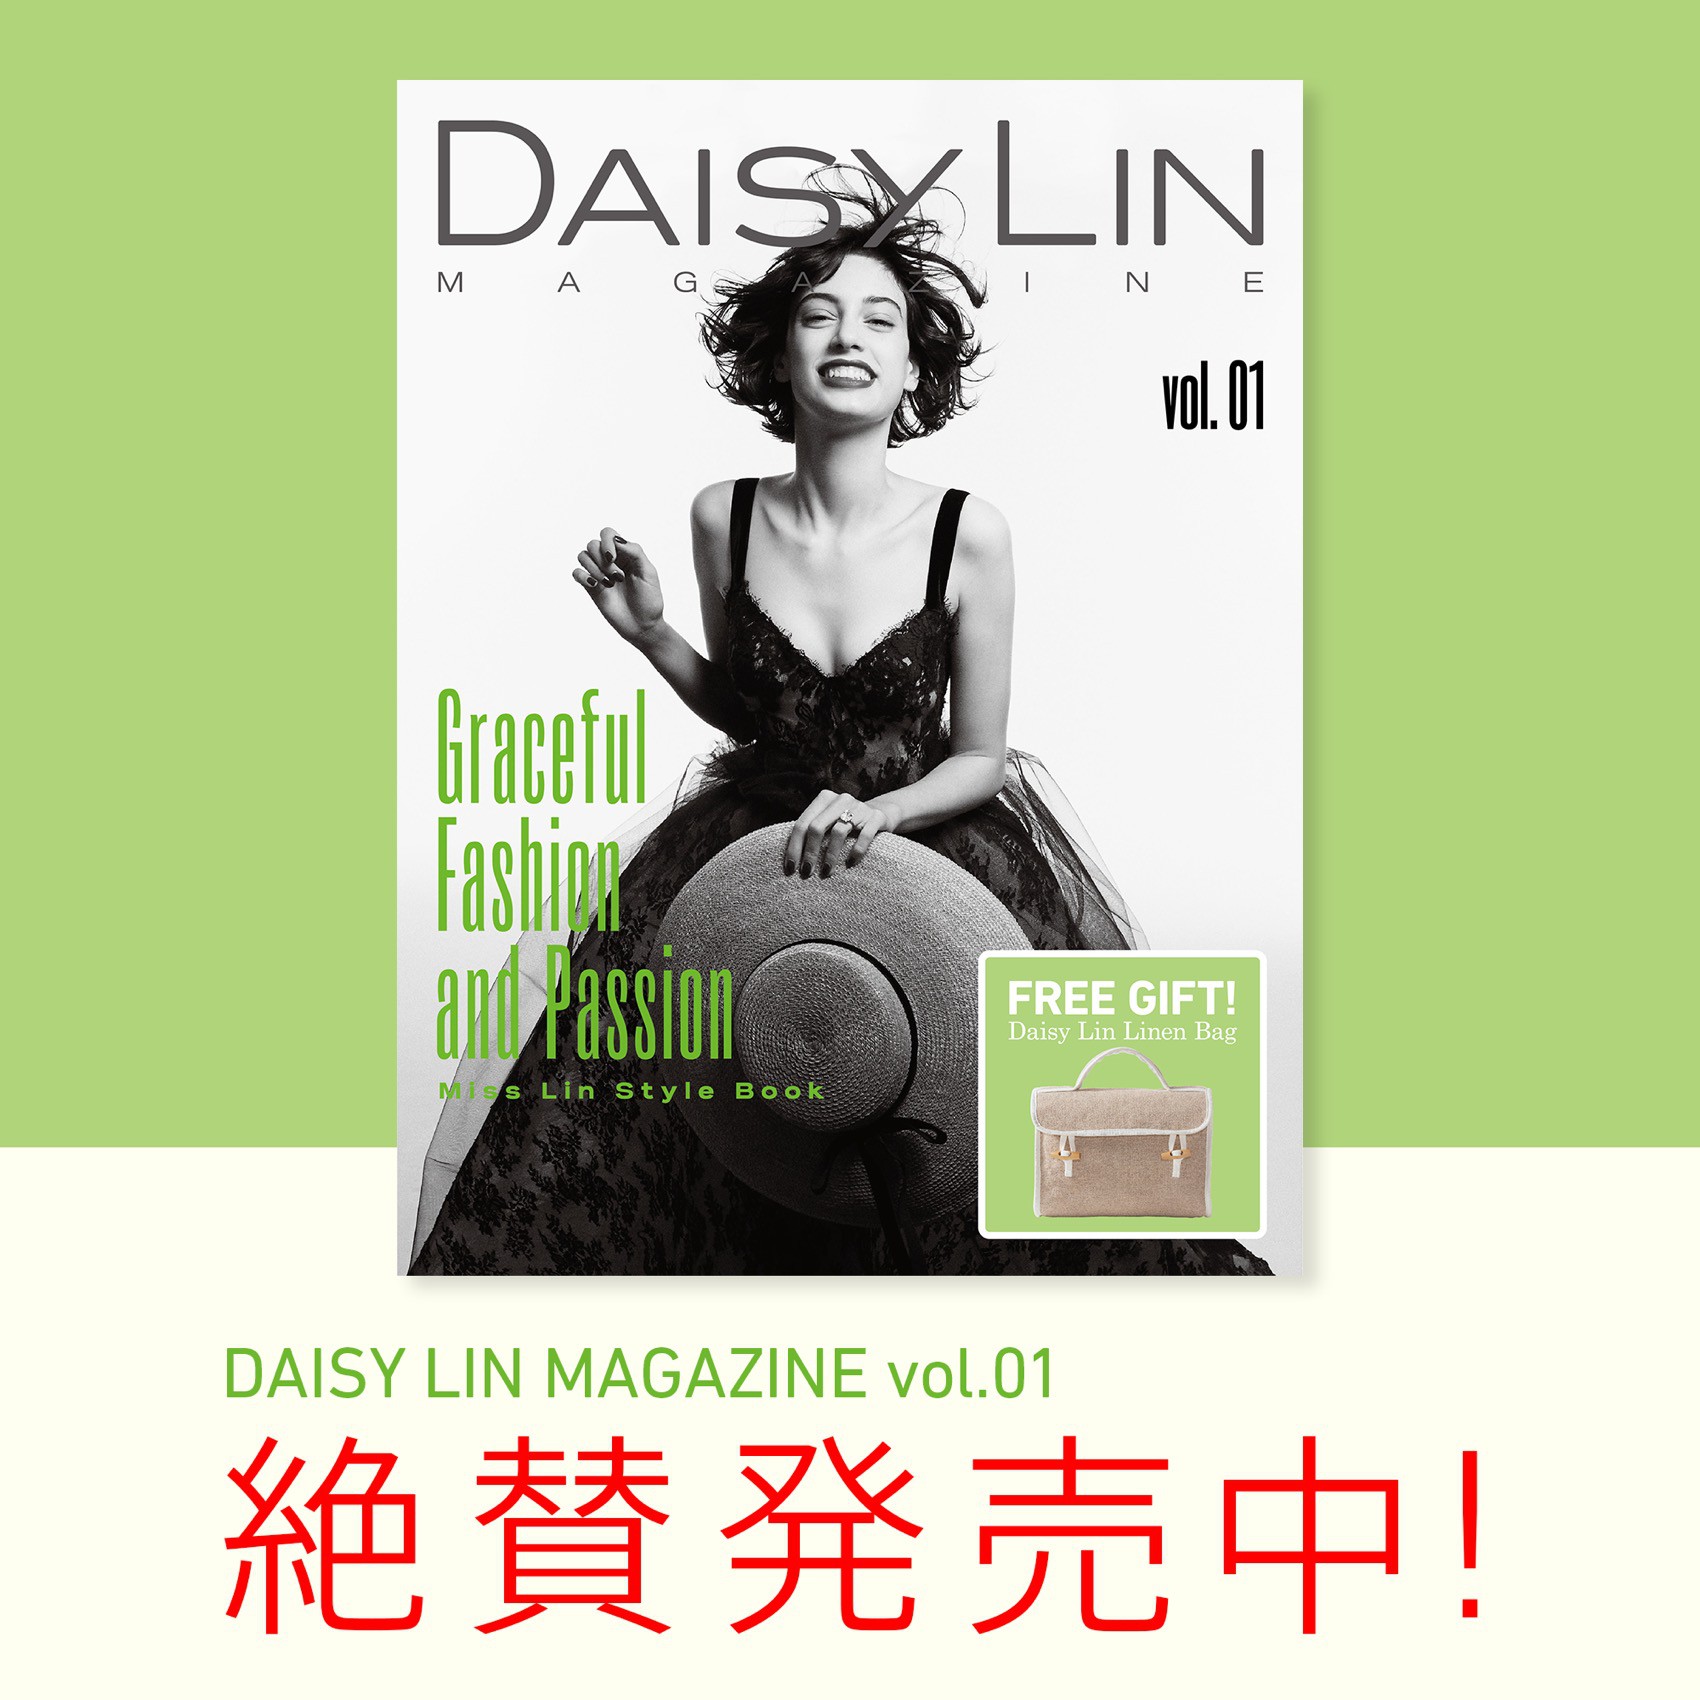 DAISY LIN | Official website and Online Boutique / DAISY LIN